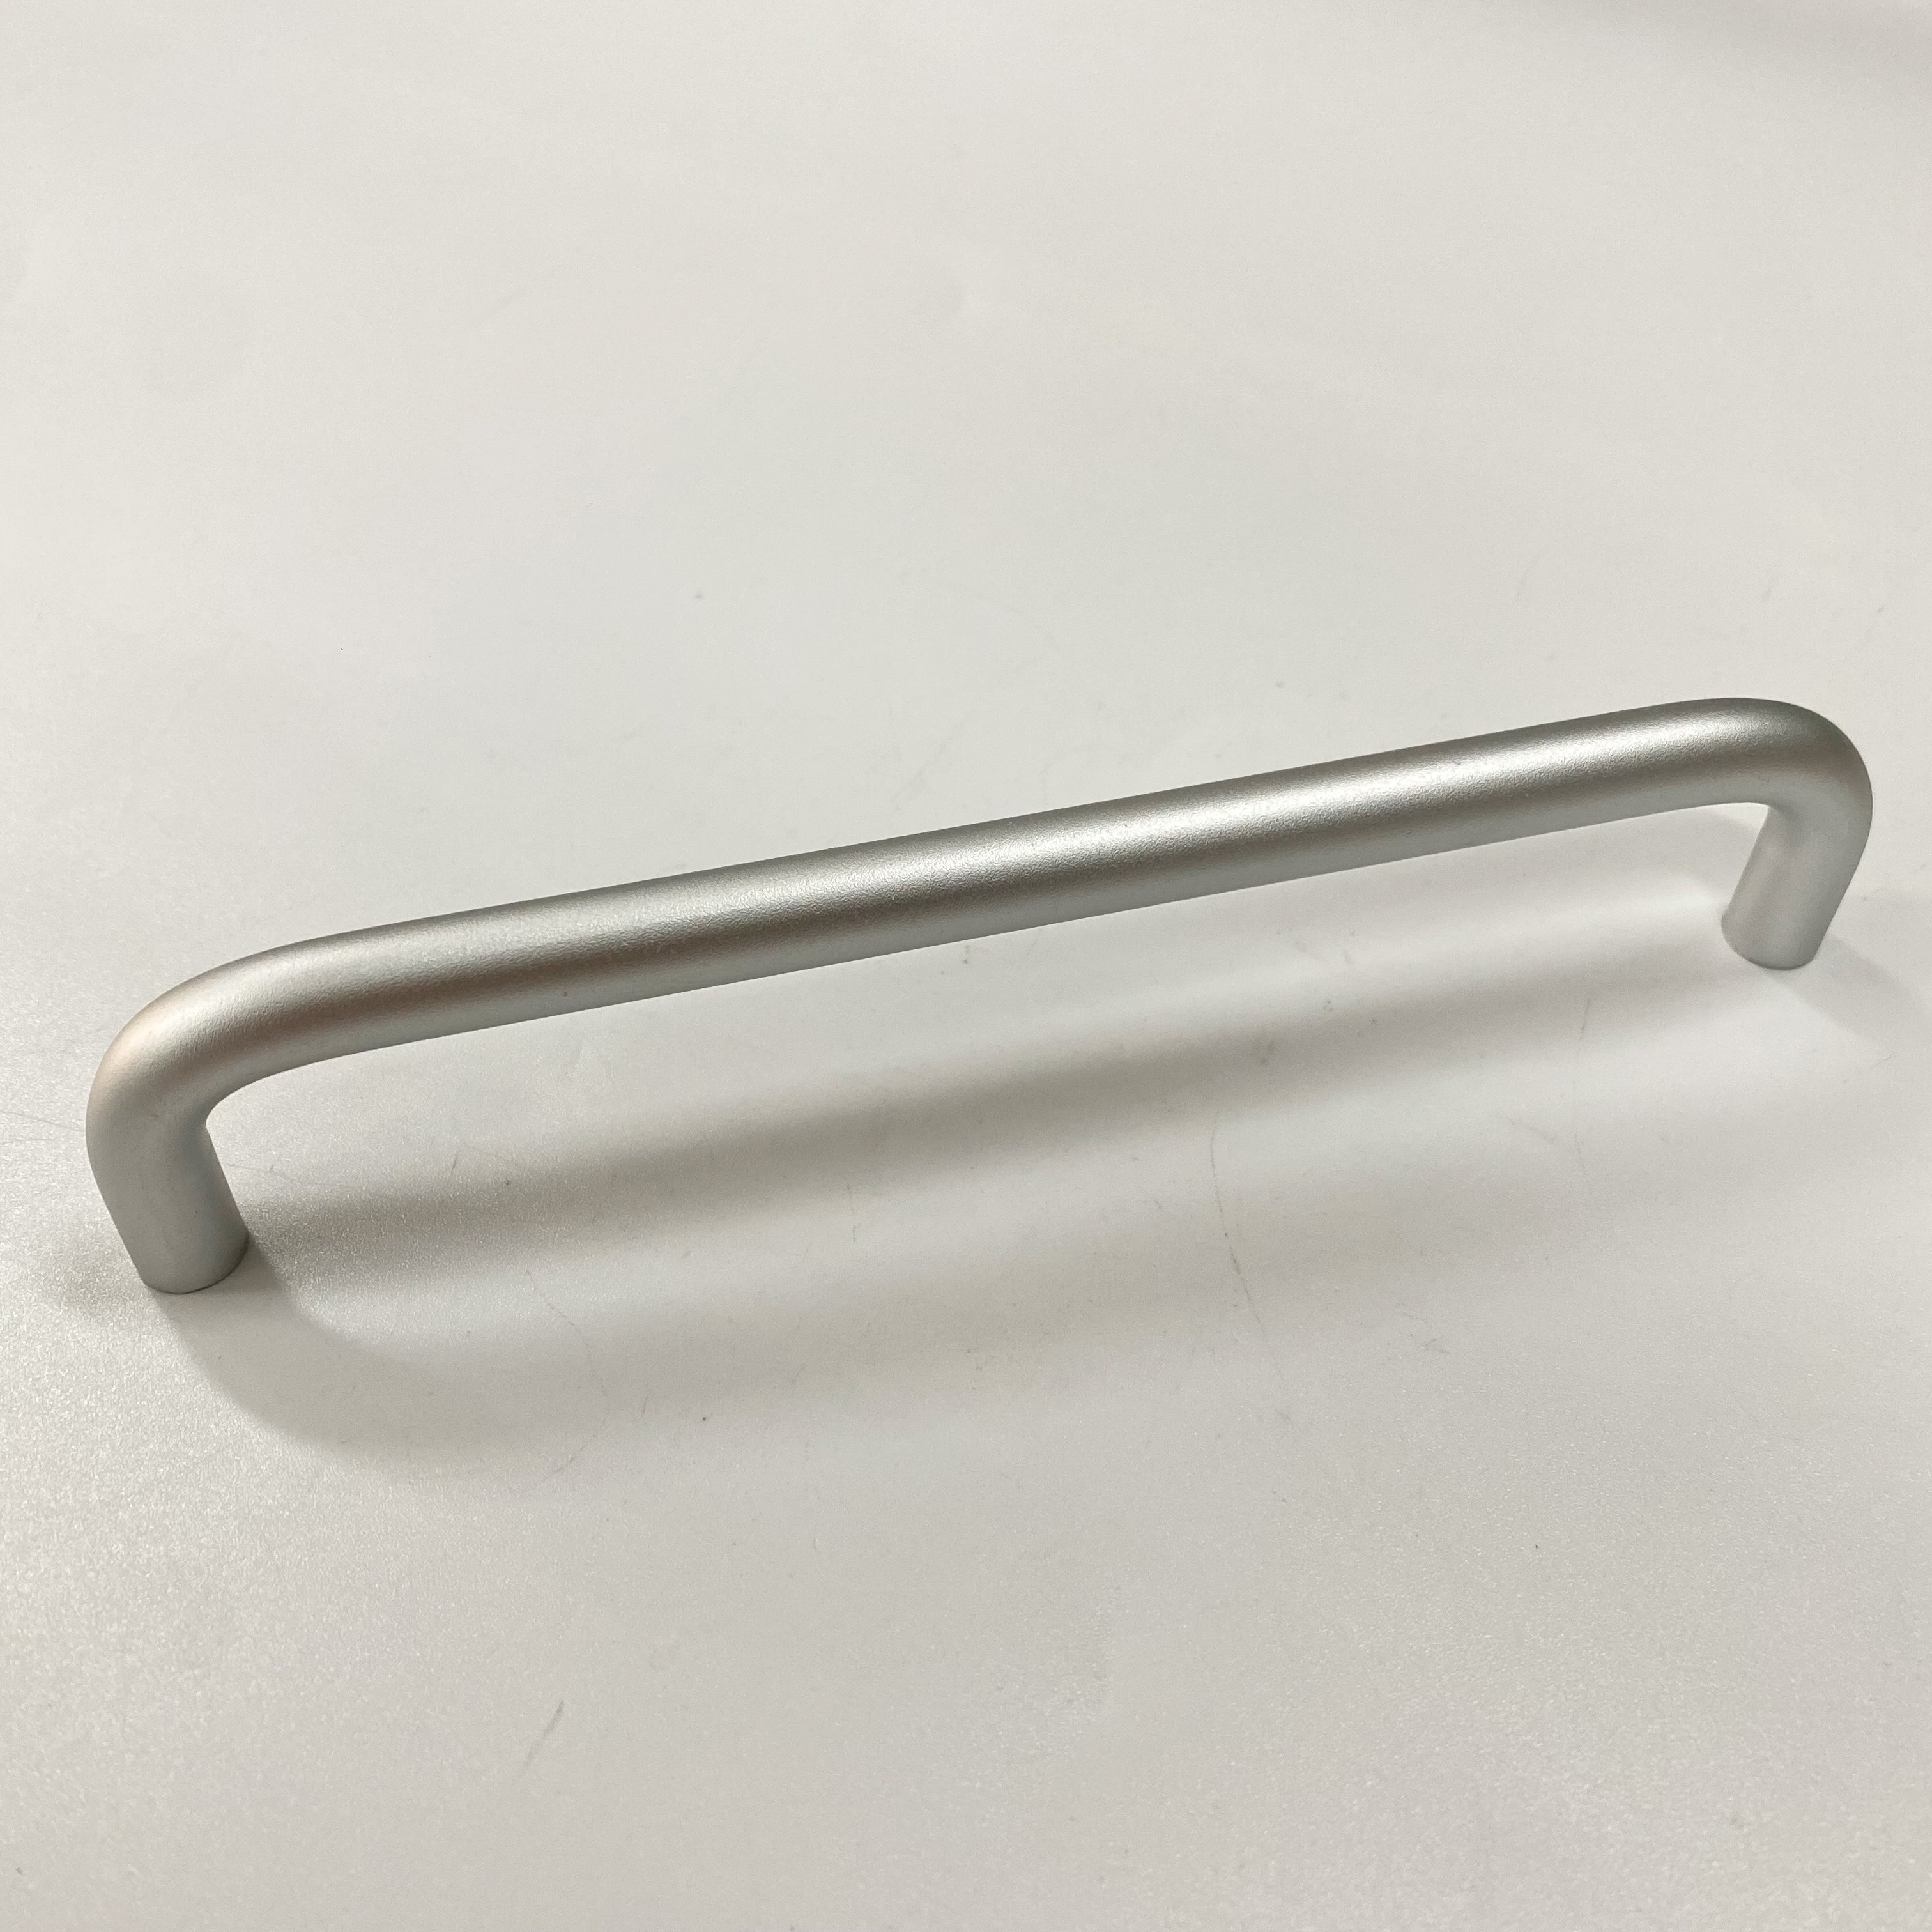 Silver surface handles